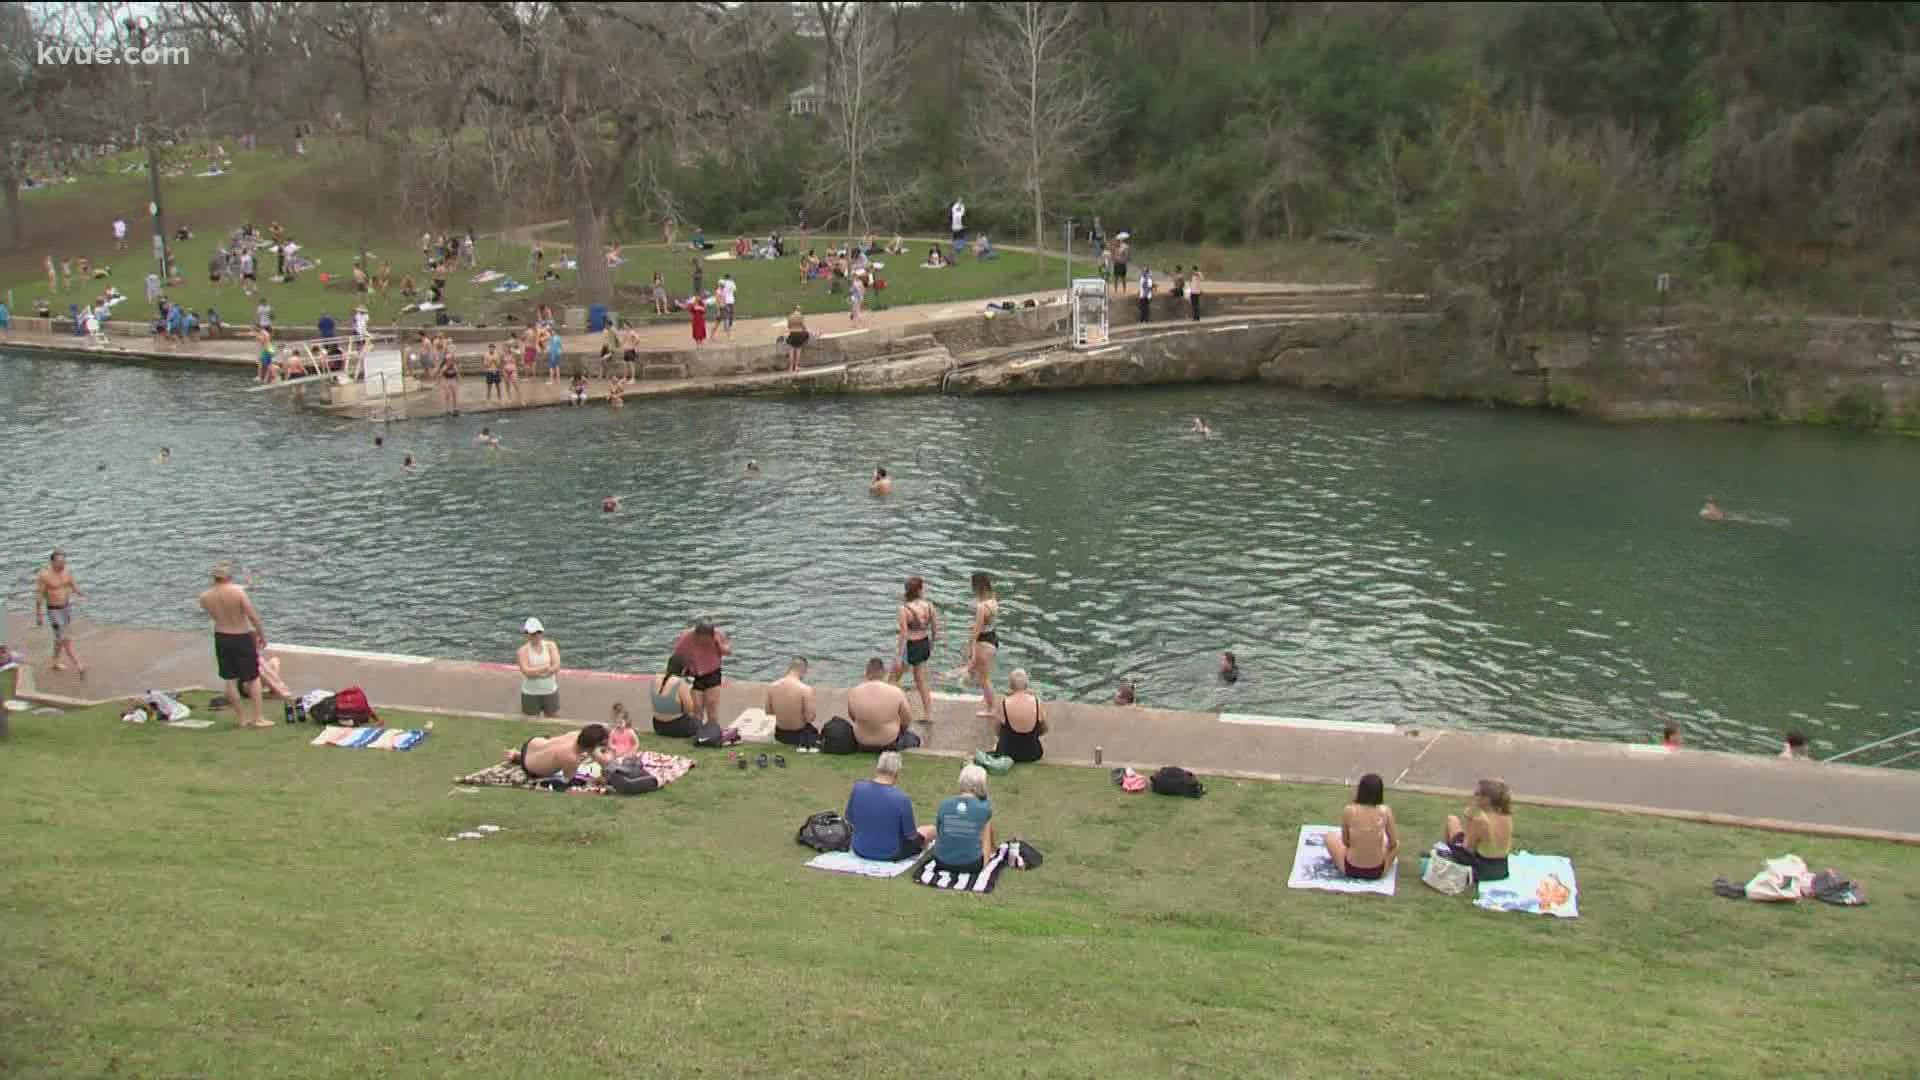 It was a warm start to the year, and many took advantaged and jumped into 2022 at Barton Springs Pool.